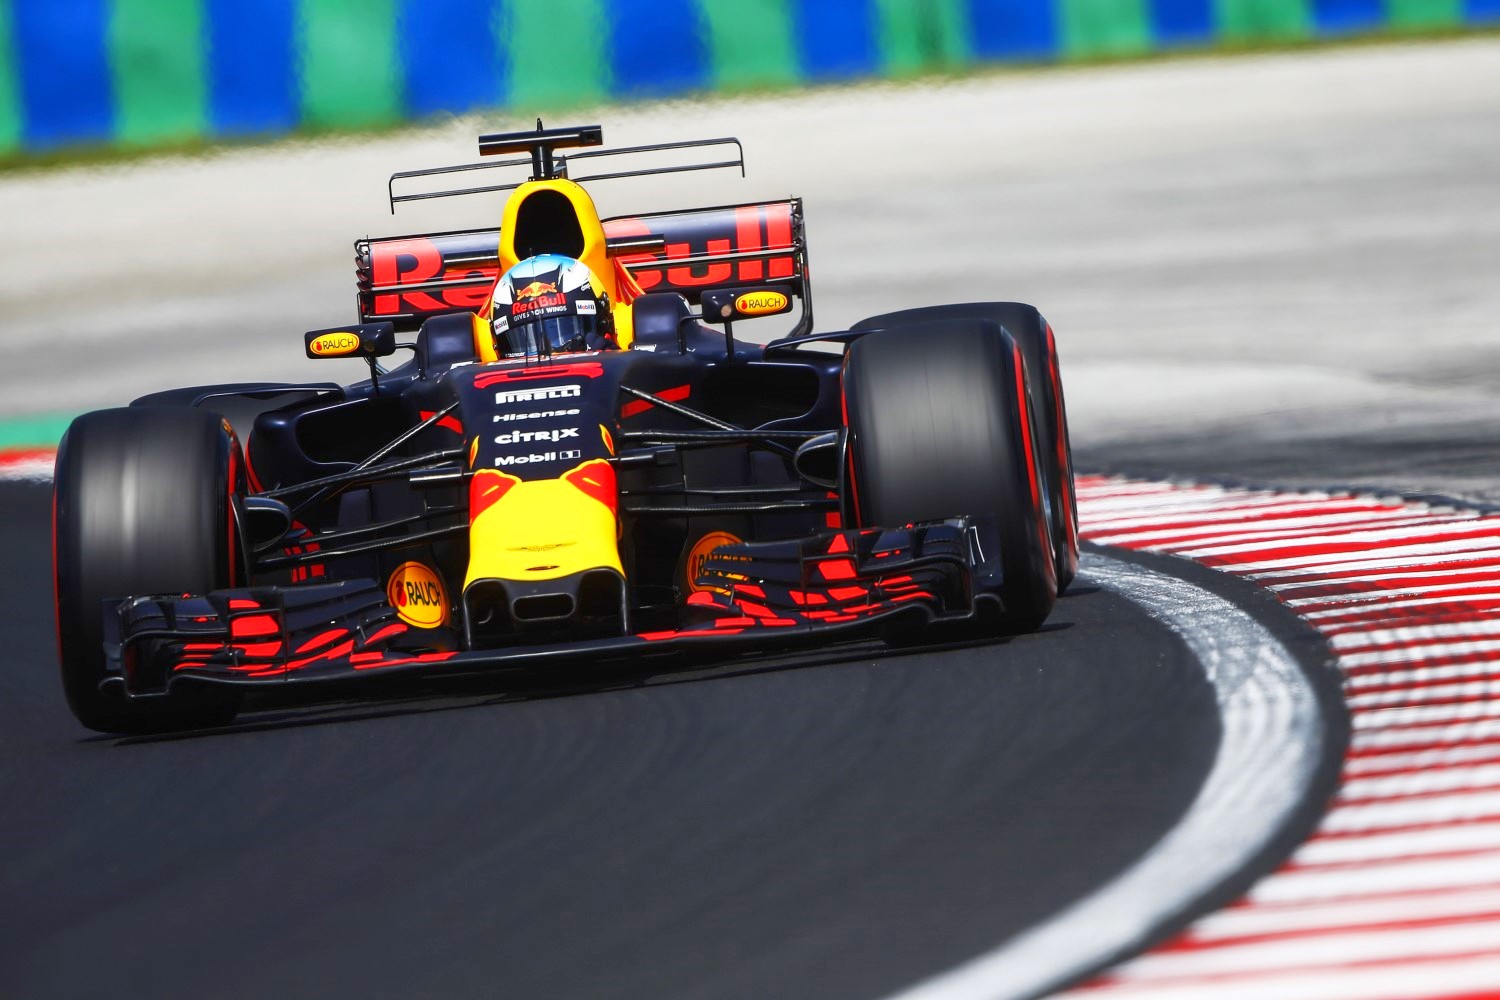 Is the new Red Bull front wing legal?